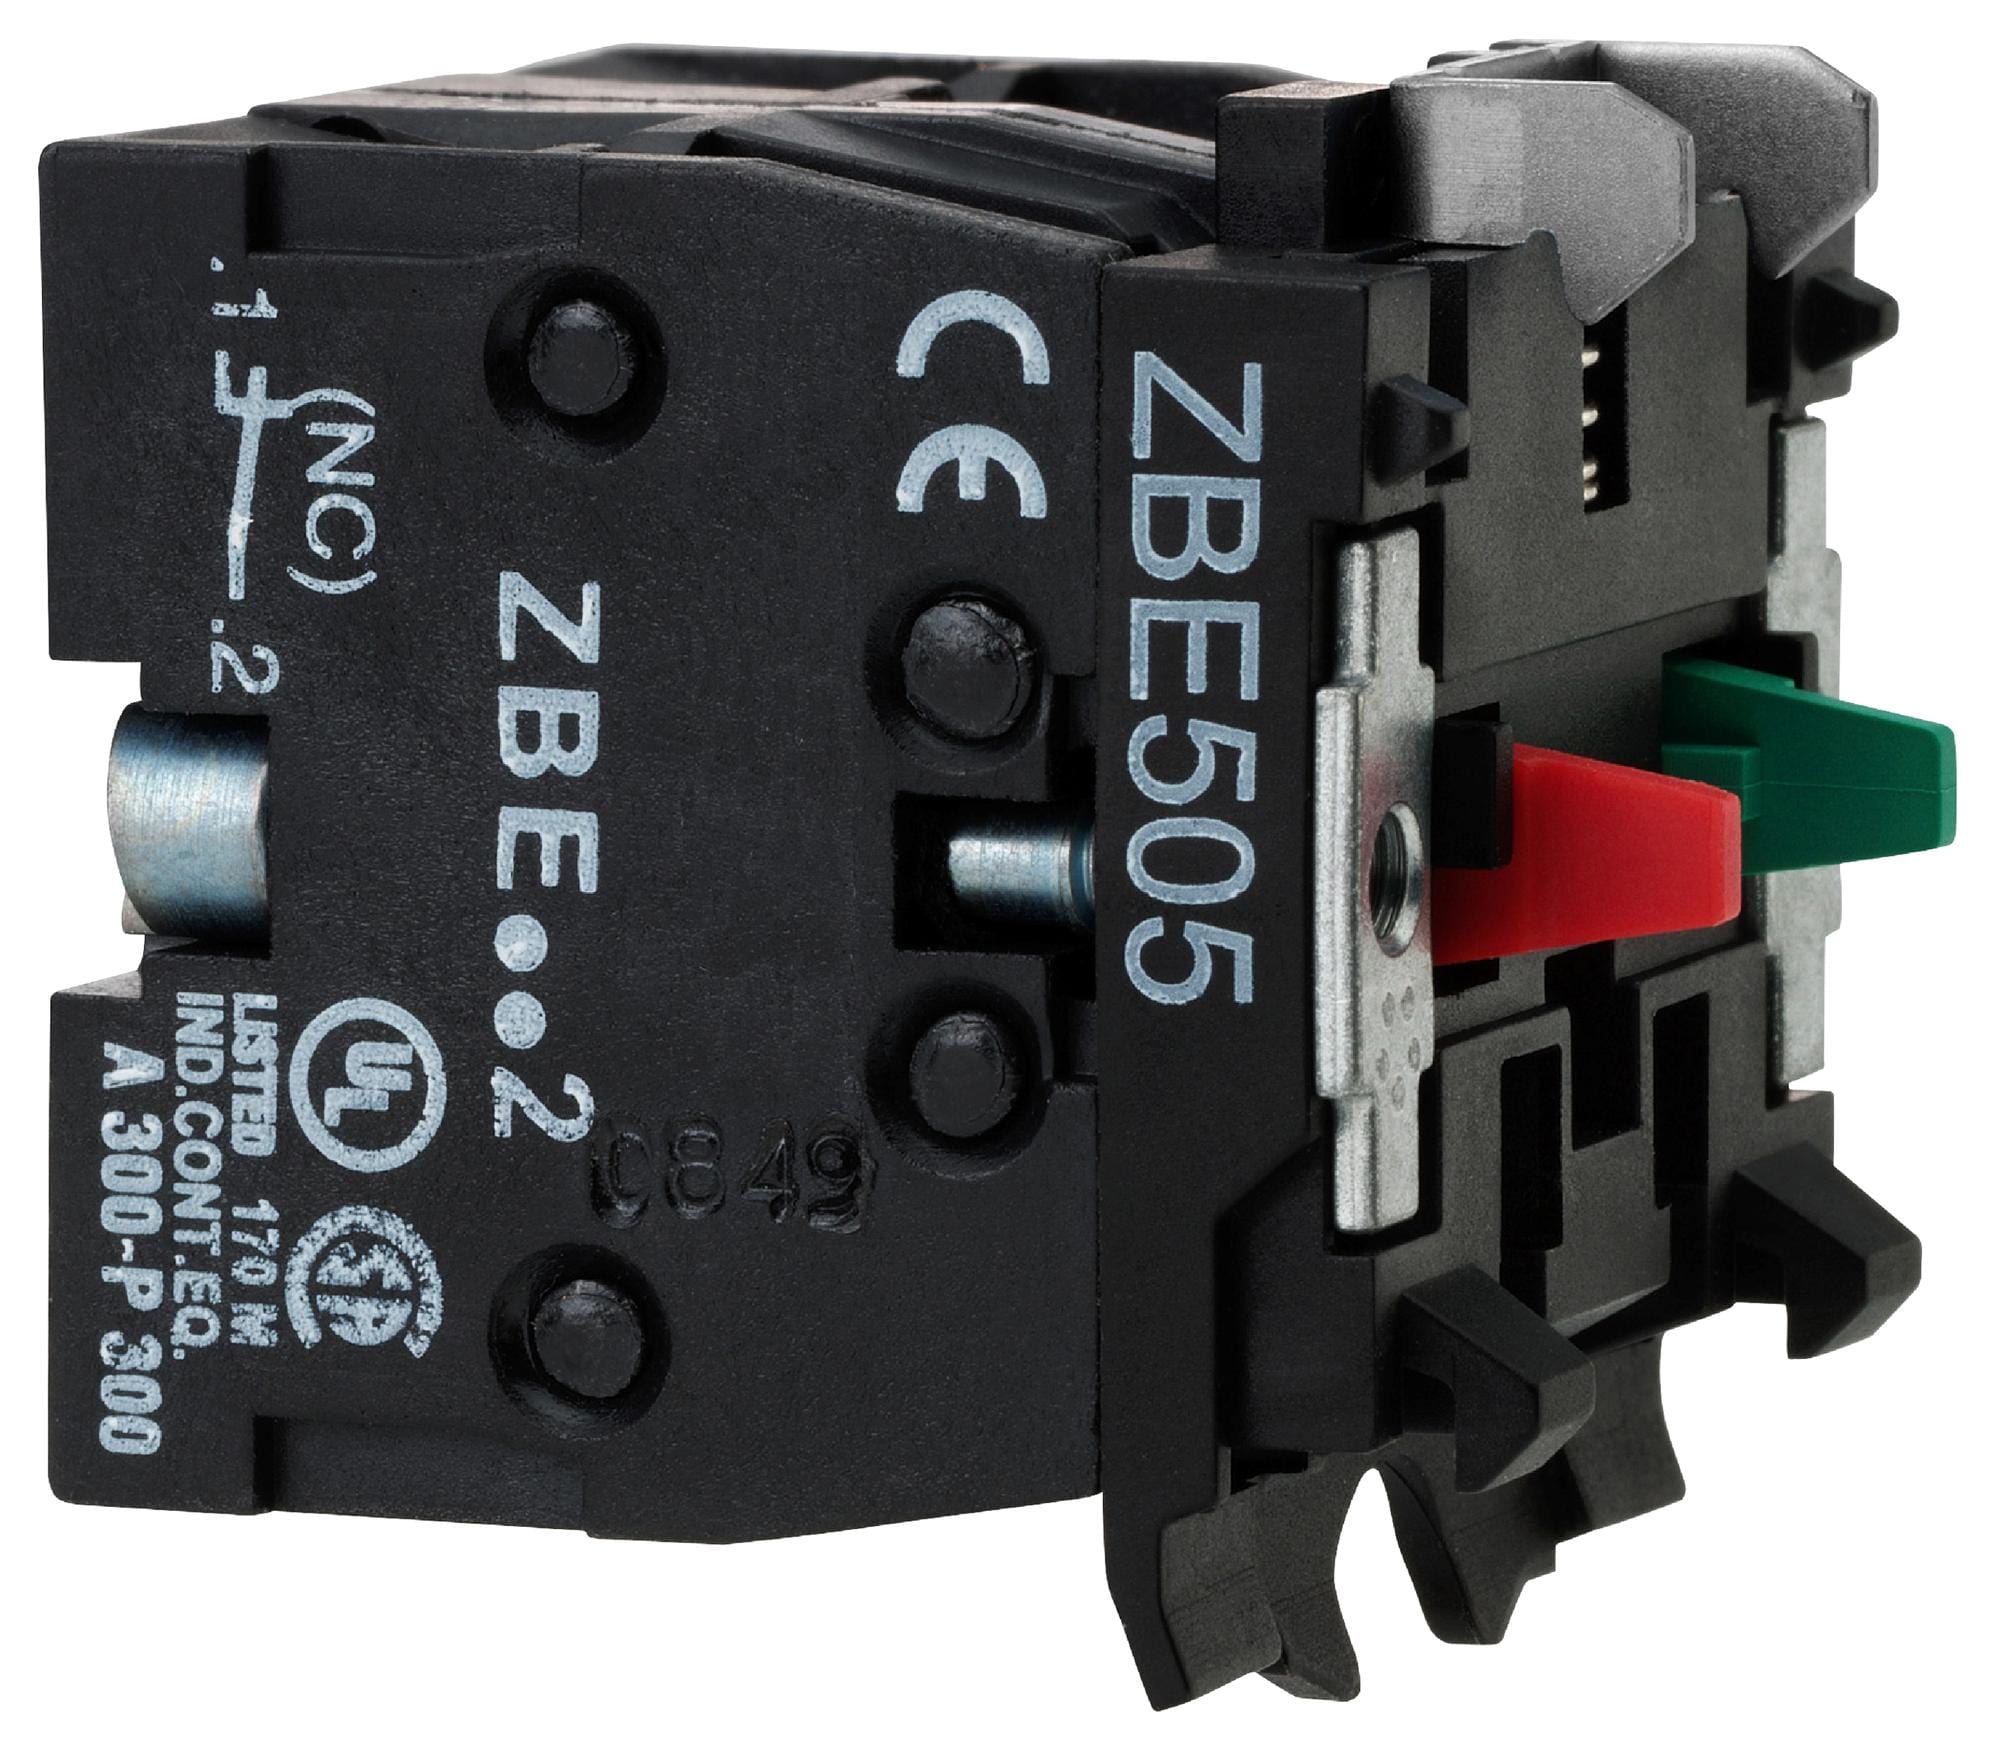 SCHNEIDER ELECTRIC Contact Blocks ZBE505 CONTACT BLOCK, 2POLE, SCREW CLAMP SCHNEIDER ELECTRIC 3215213 ZBE505